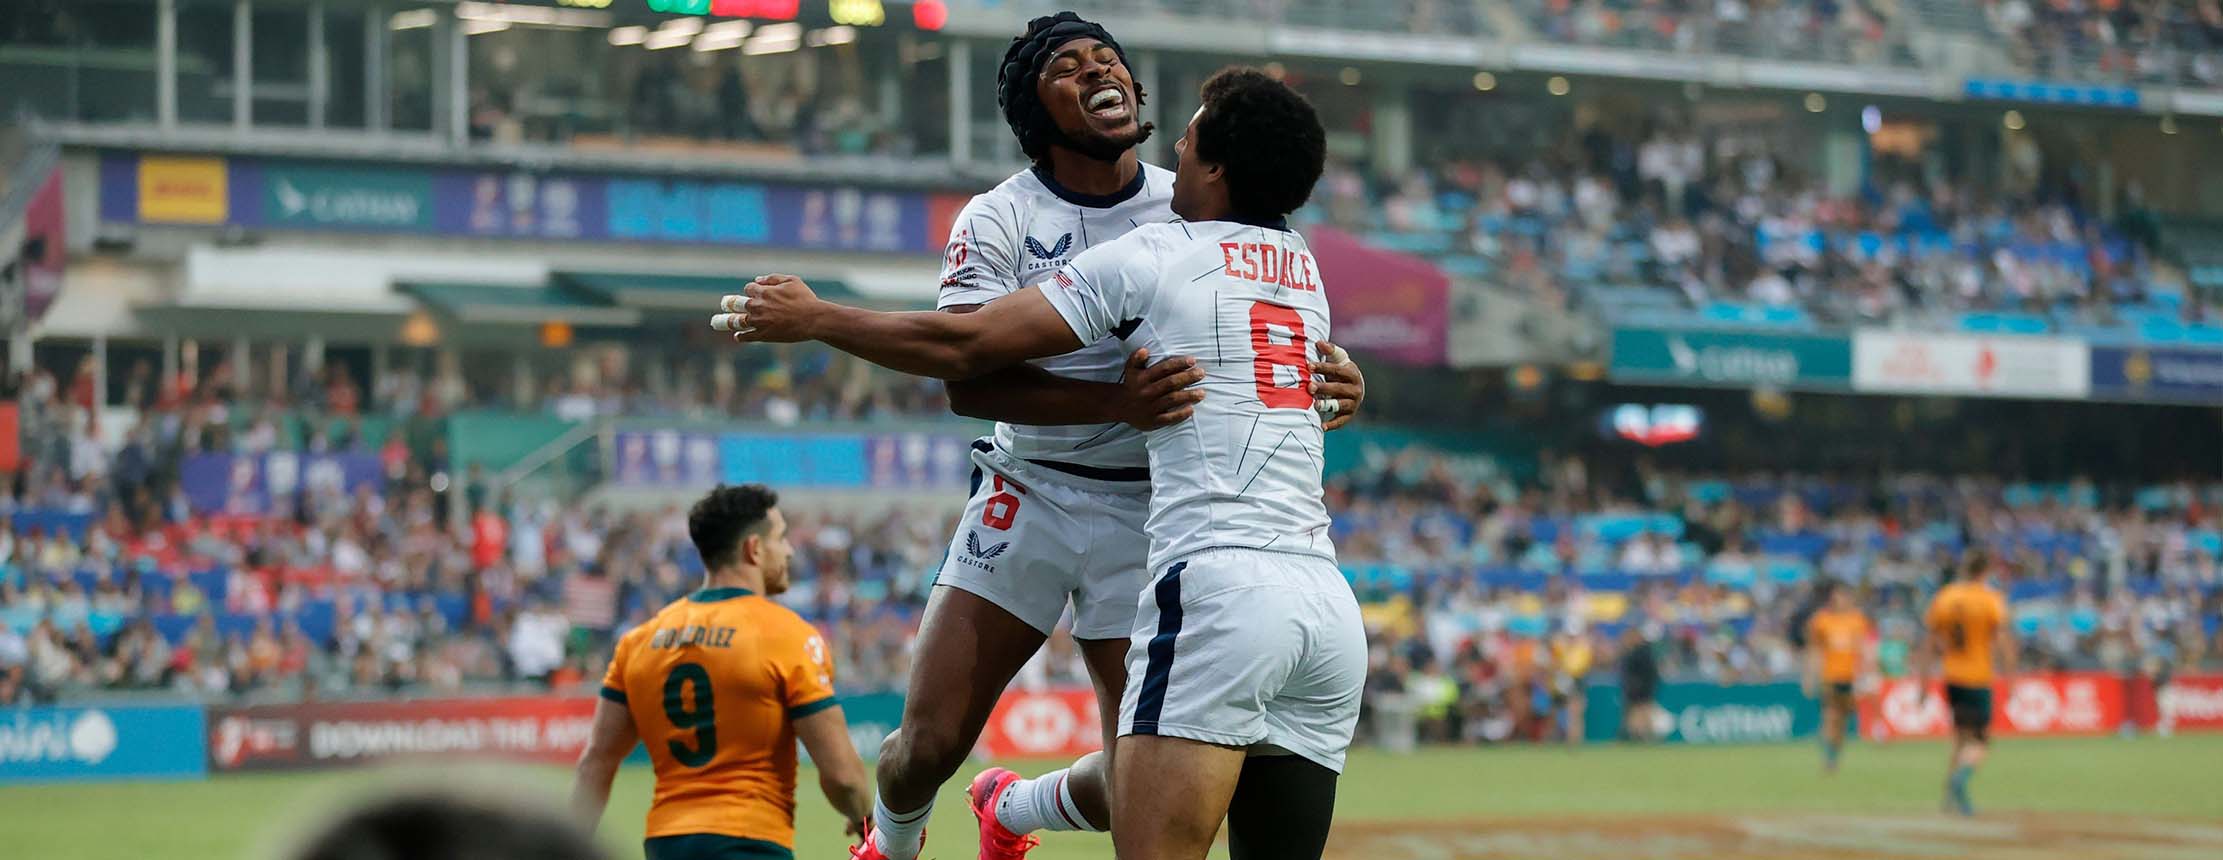 Usa captain kevon williams and malacchi esdale celebrate a try © mike lee - klc fotos